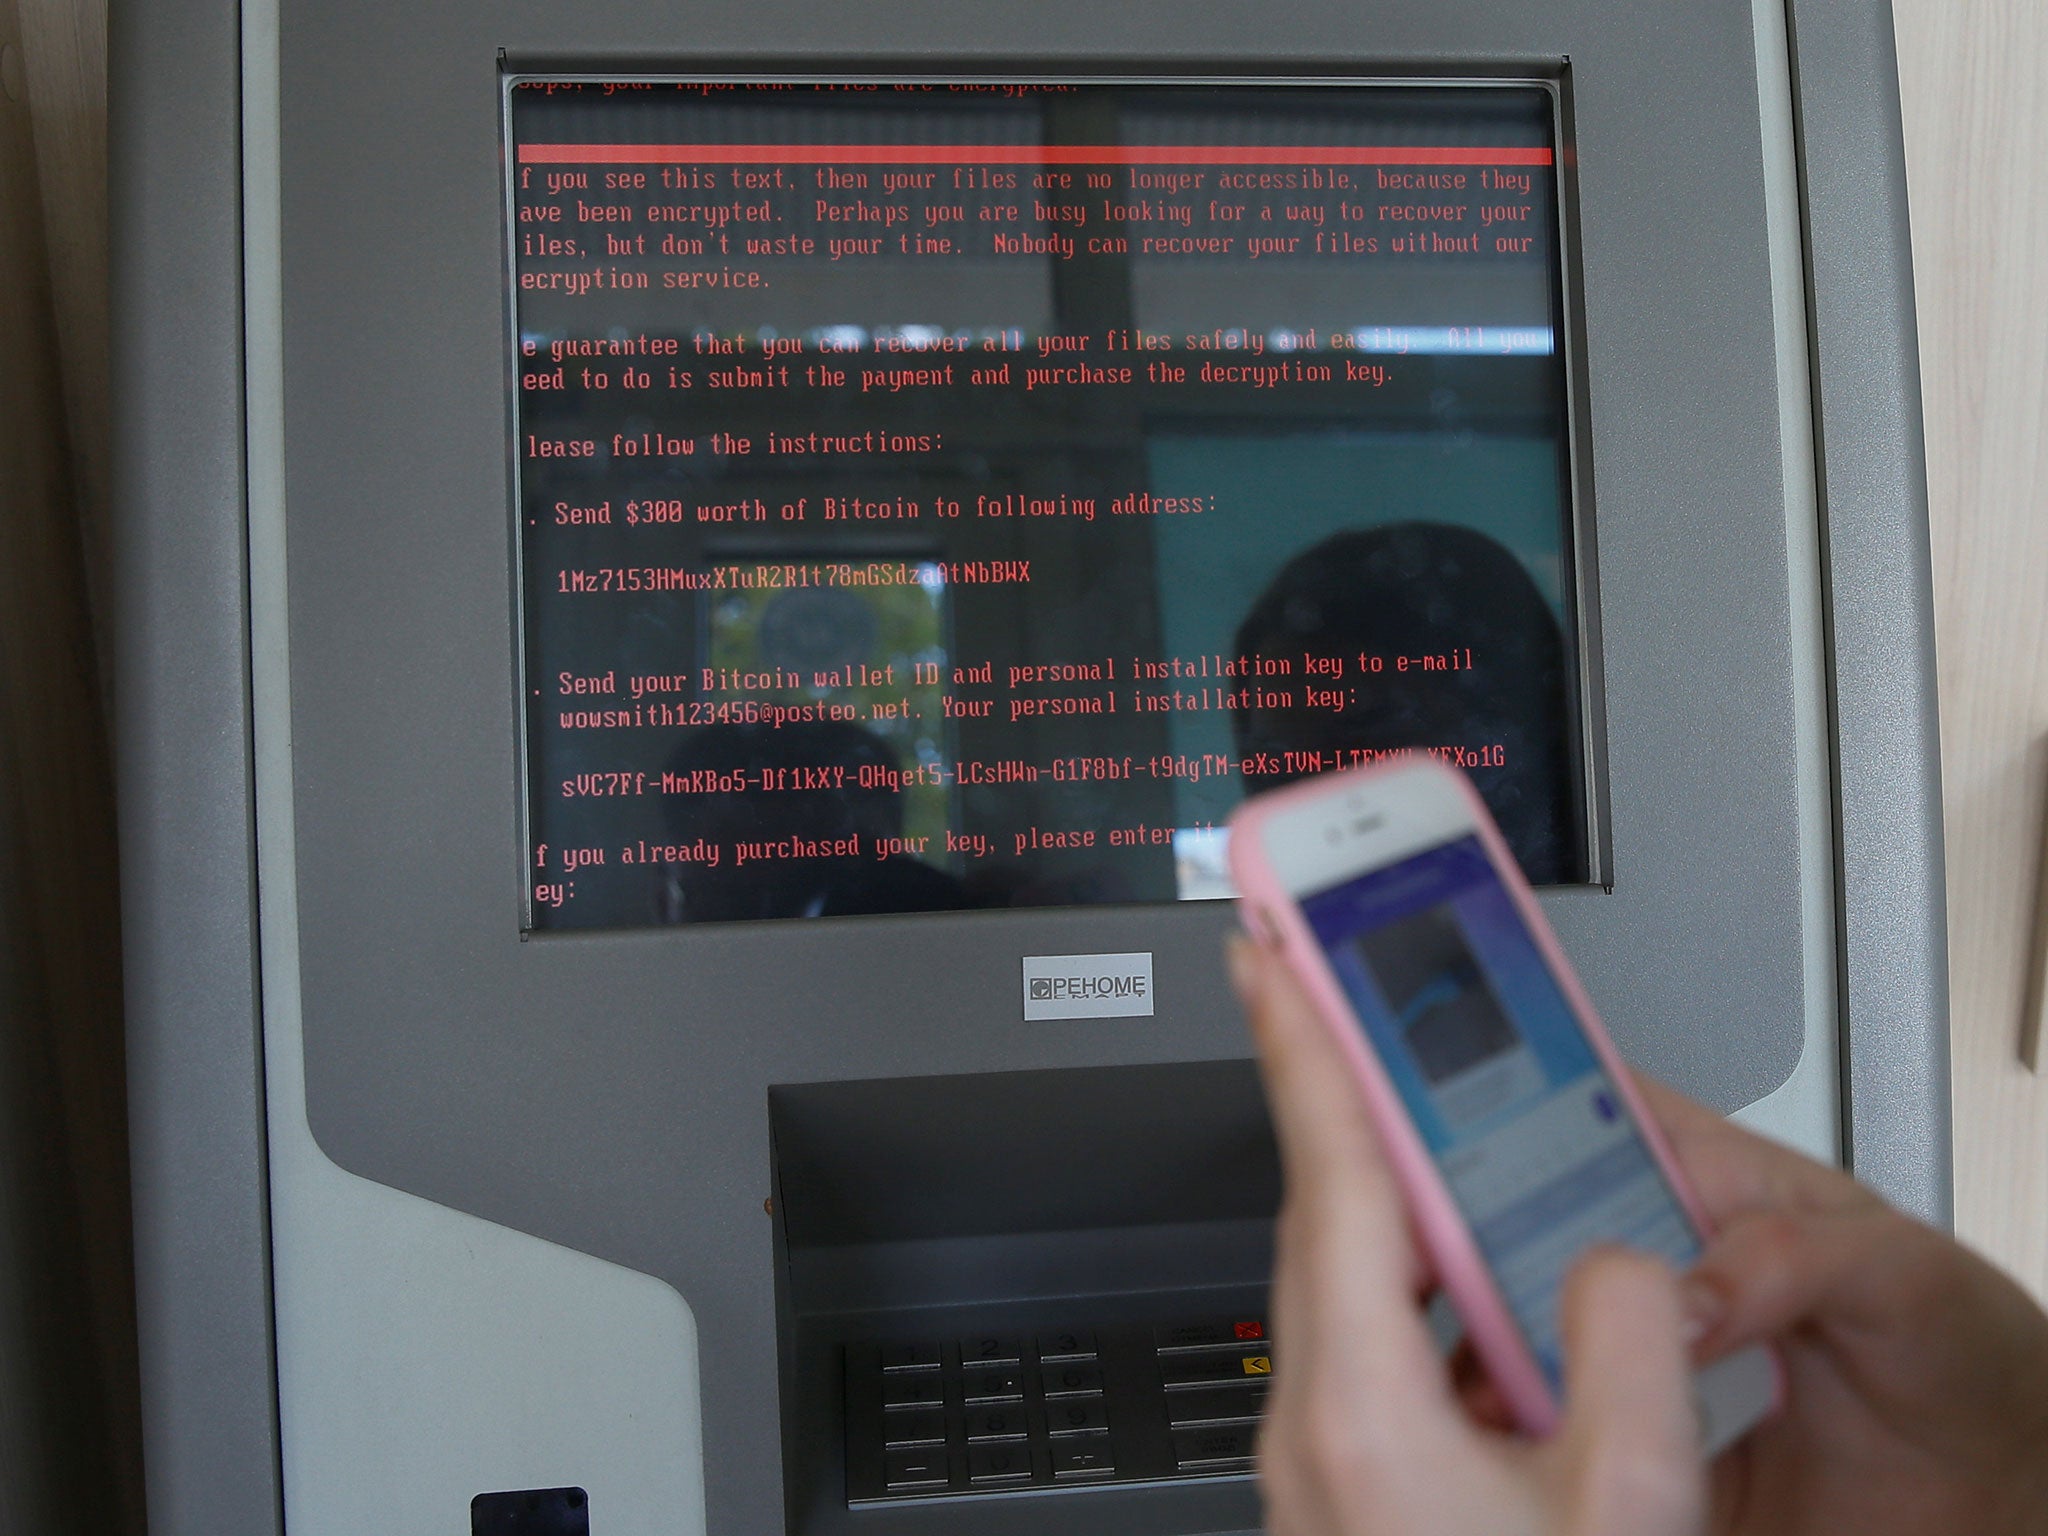 A message demanding money is seen on a monitor of a payment terminal at a branch of Ukraine's state-owned bank Oschadbank after a wave of cyber attacks, in Kiev, Ukraine, June 27, 2017.